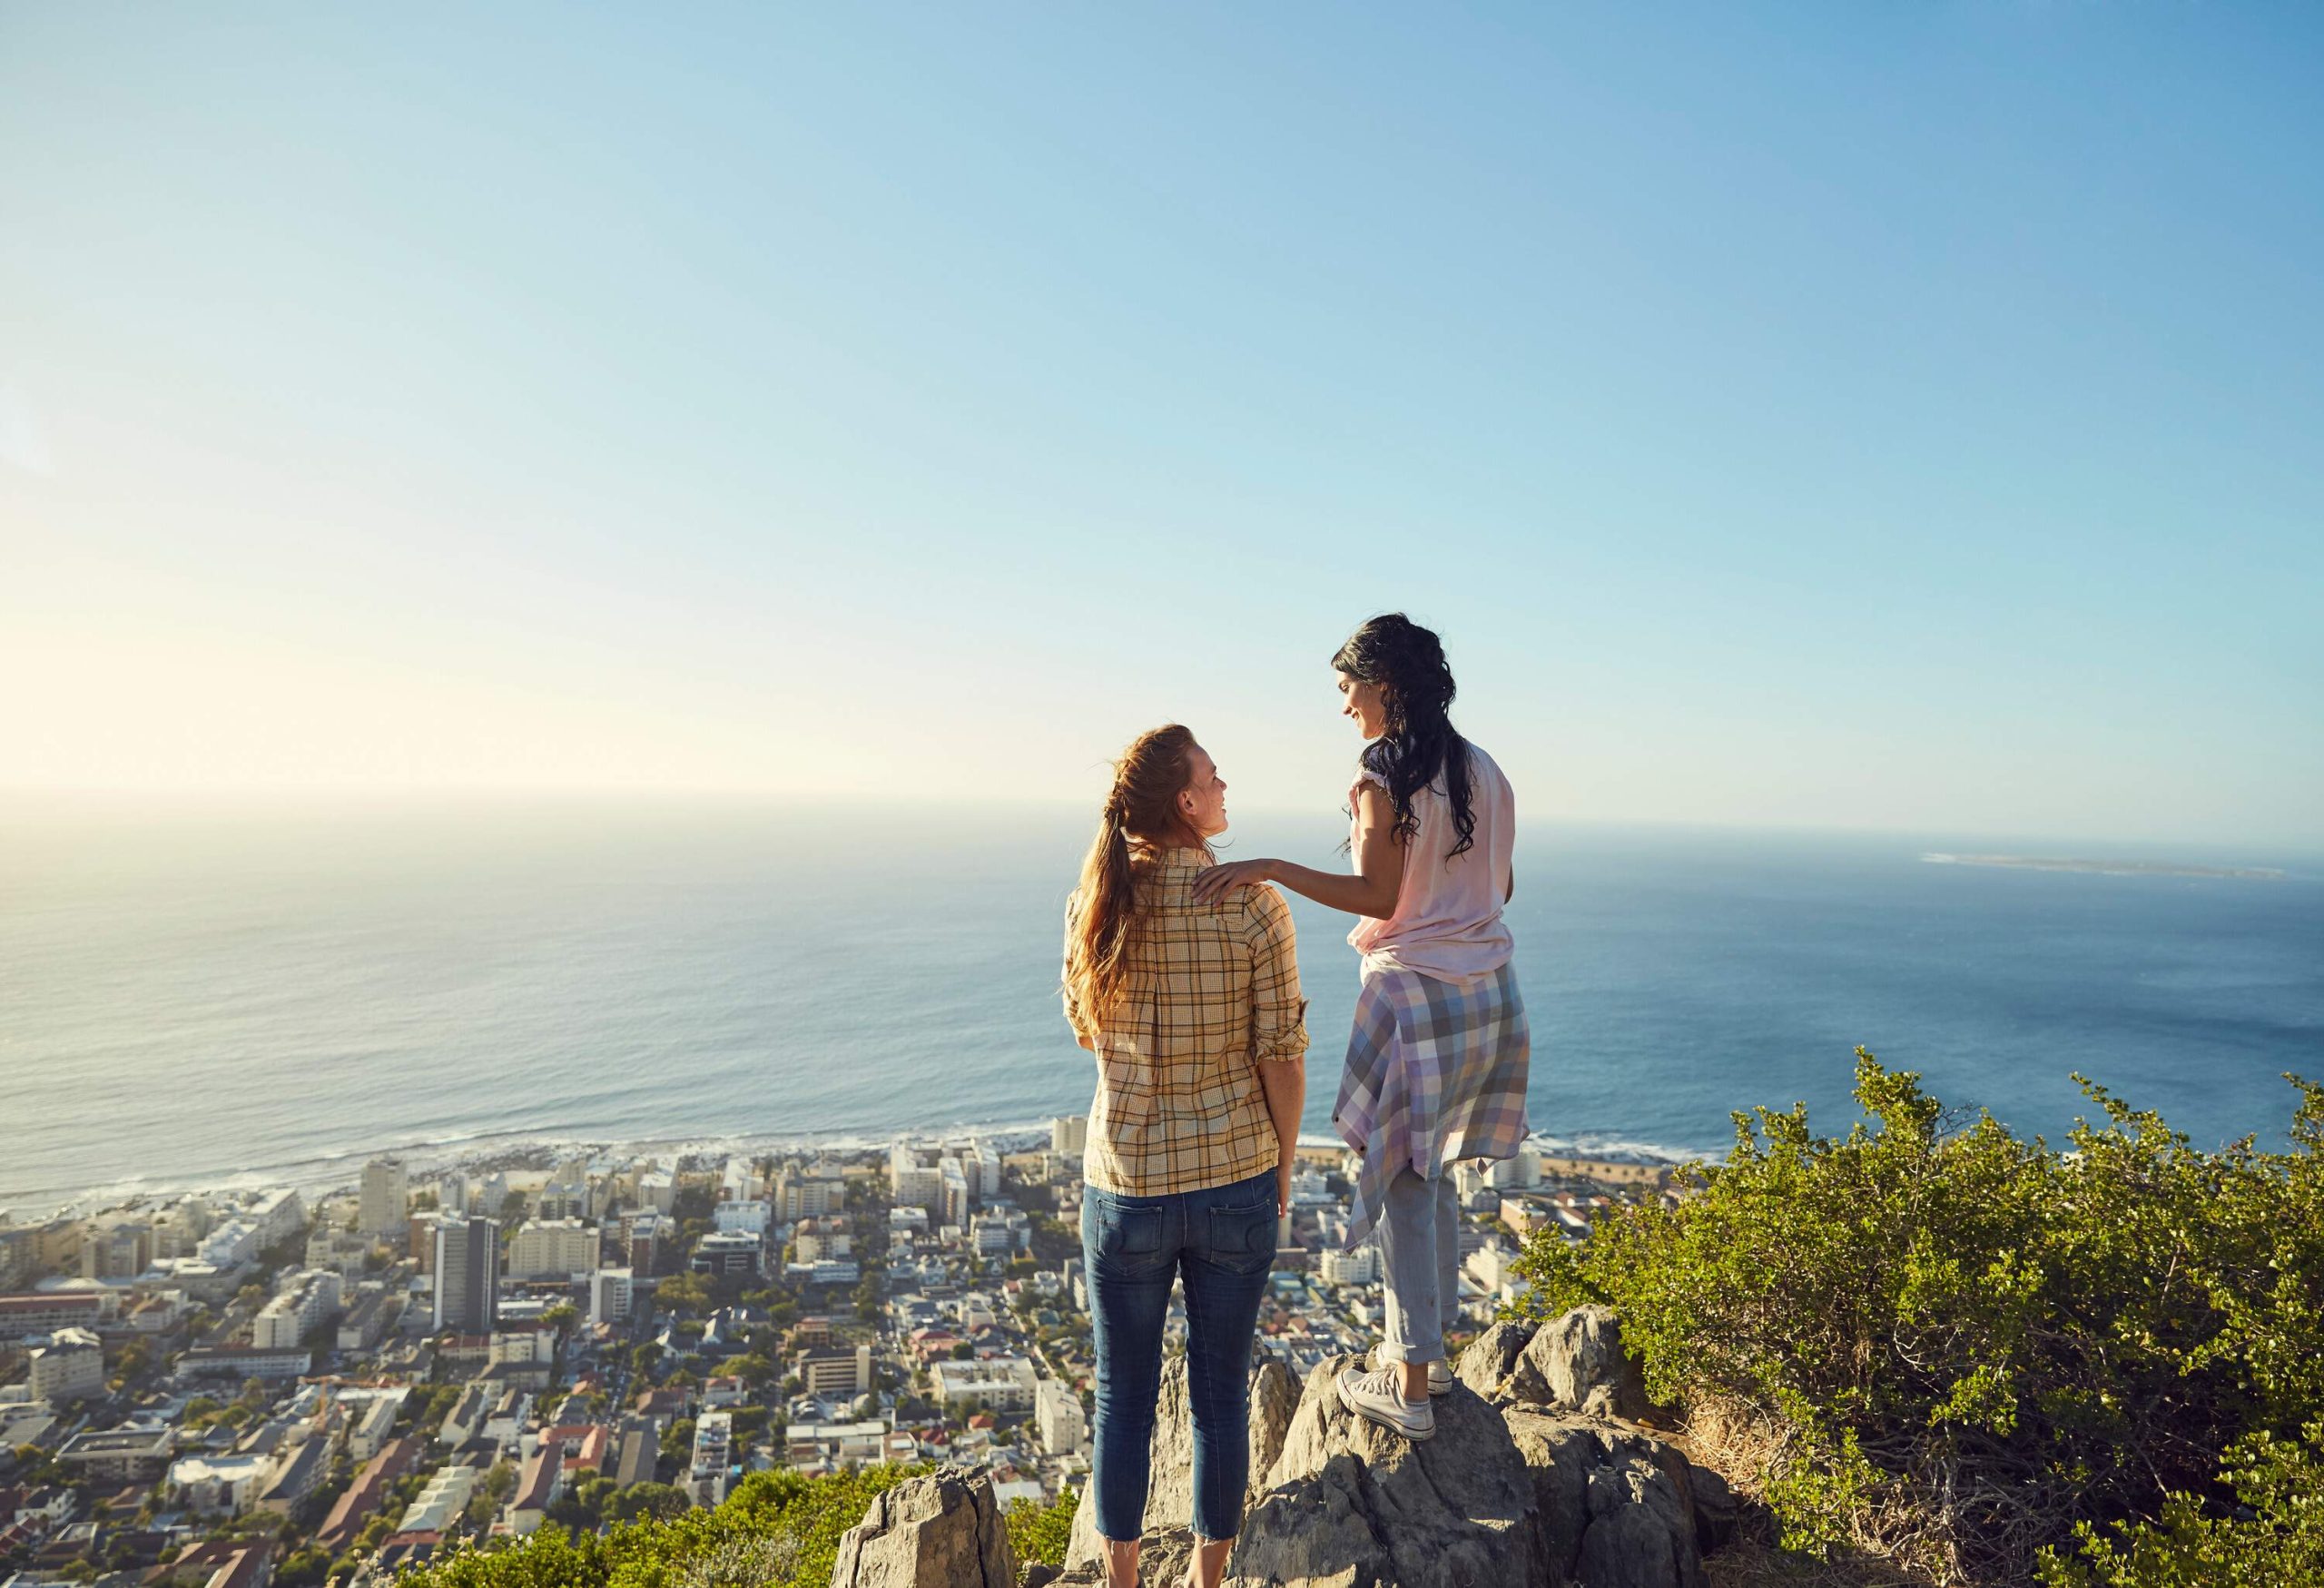 Two friends smile at each other, one placing her hand on the other's shoulder as they stand on a mountain peak with views of a seaside city.